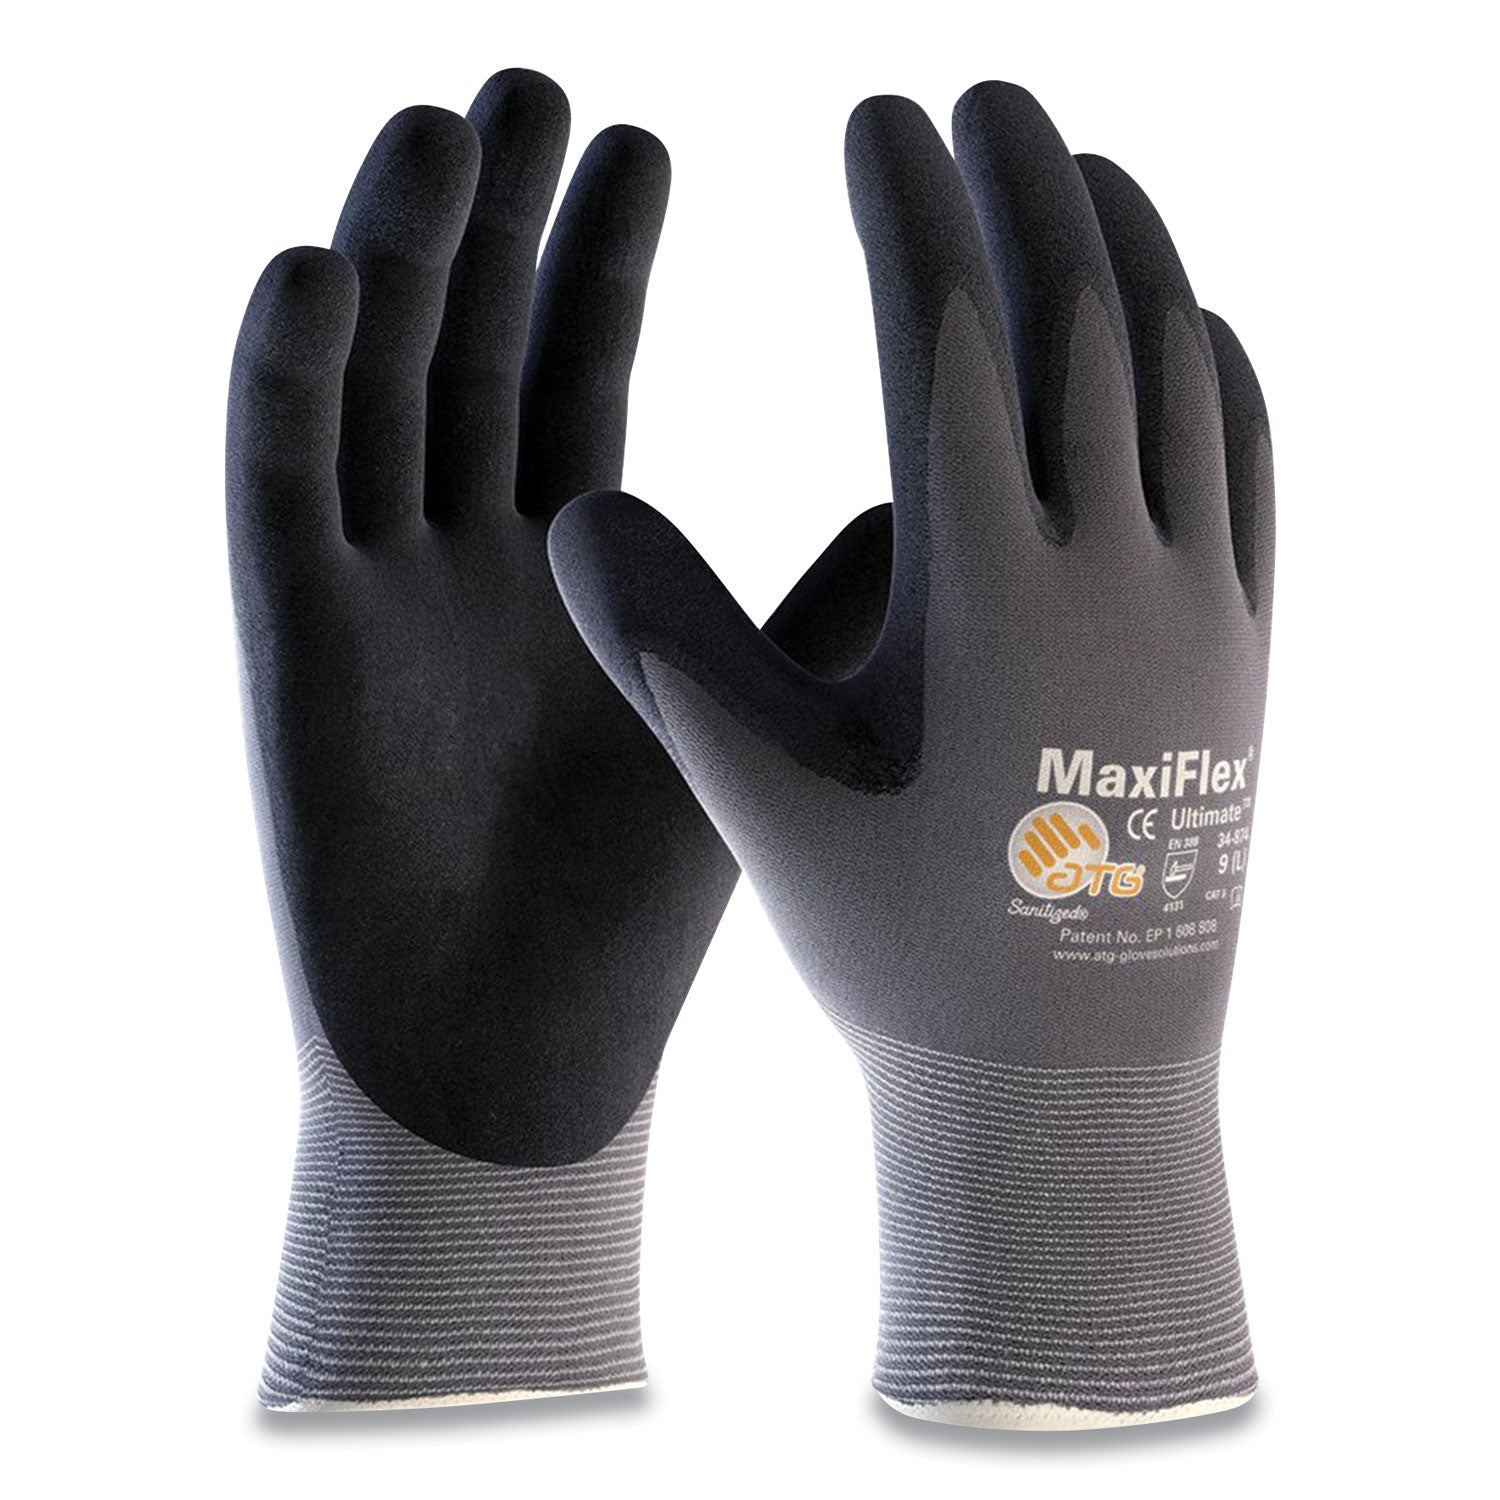 ultimate-seamless-knit-nylon-gloves-nitrile-coated-microfoam-grip-on-palm-and-fingers-medium-gray-12-pairs_pid34874m - 1